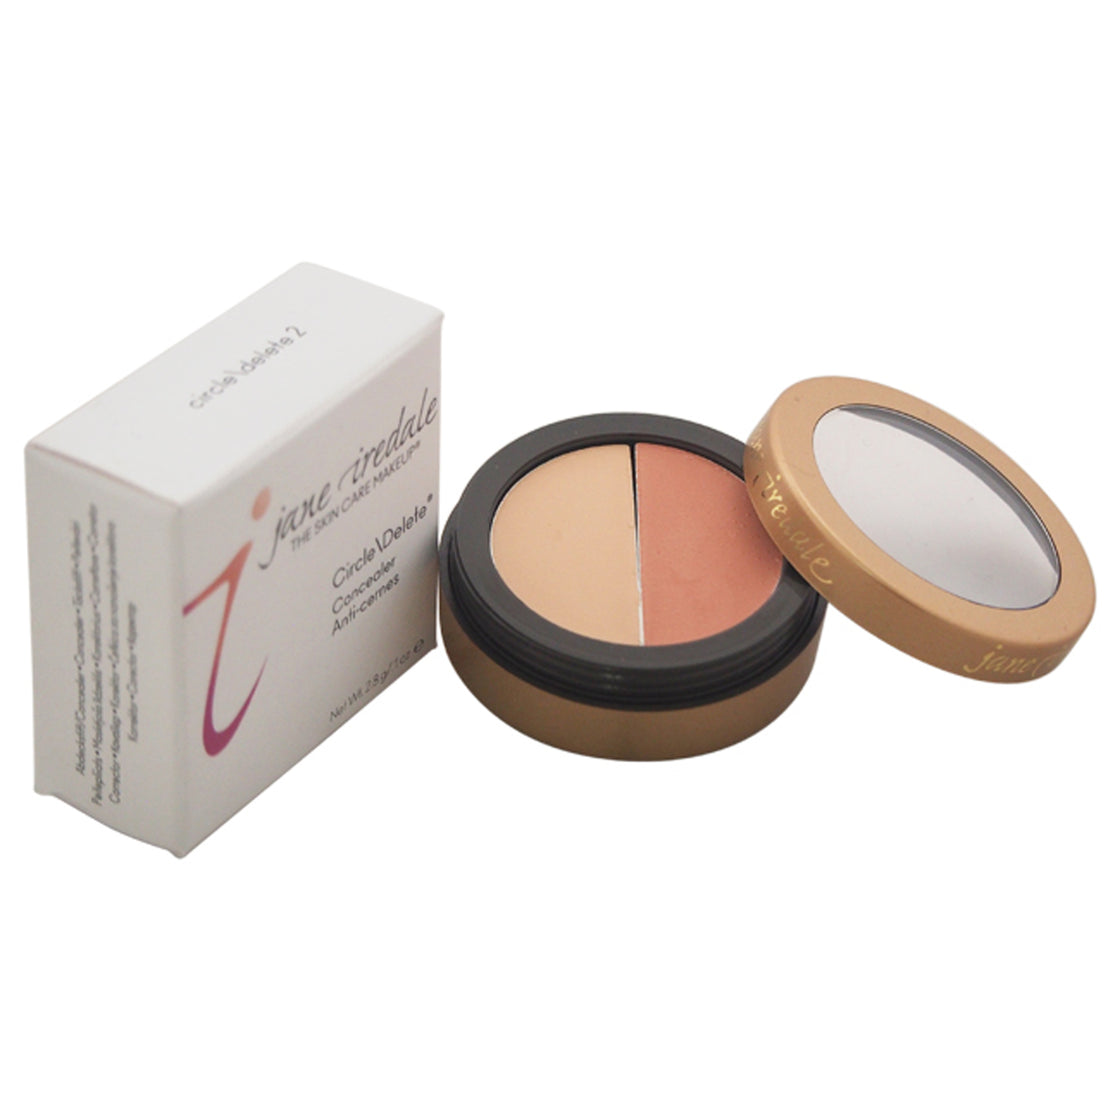 Circle Delete Concealer - # 2 Peach by Jane Iredale for Women - 0.1 oz Concealer